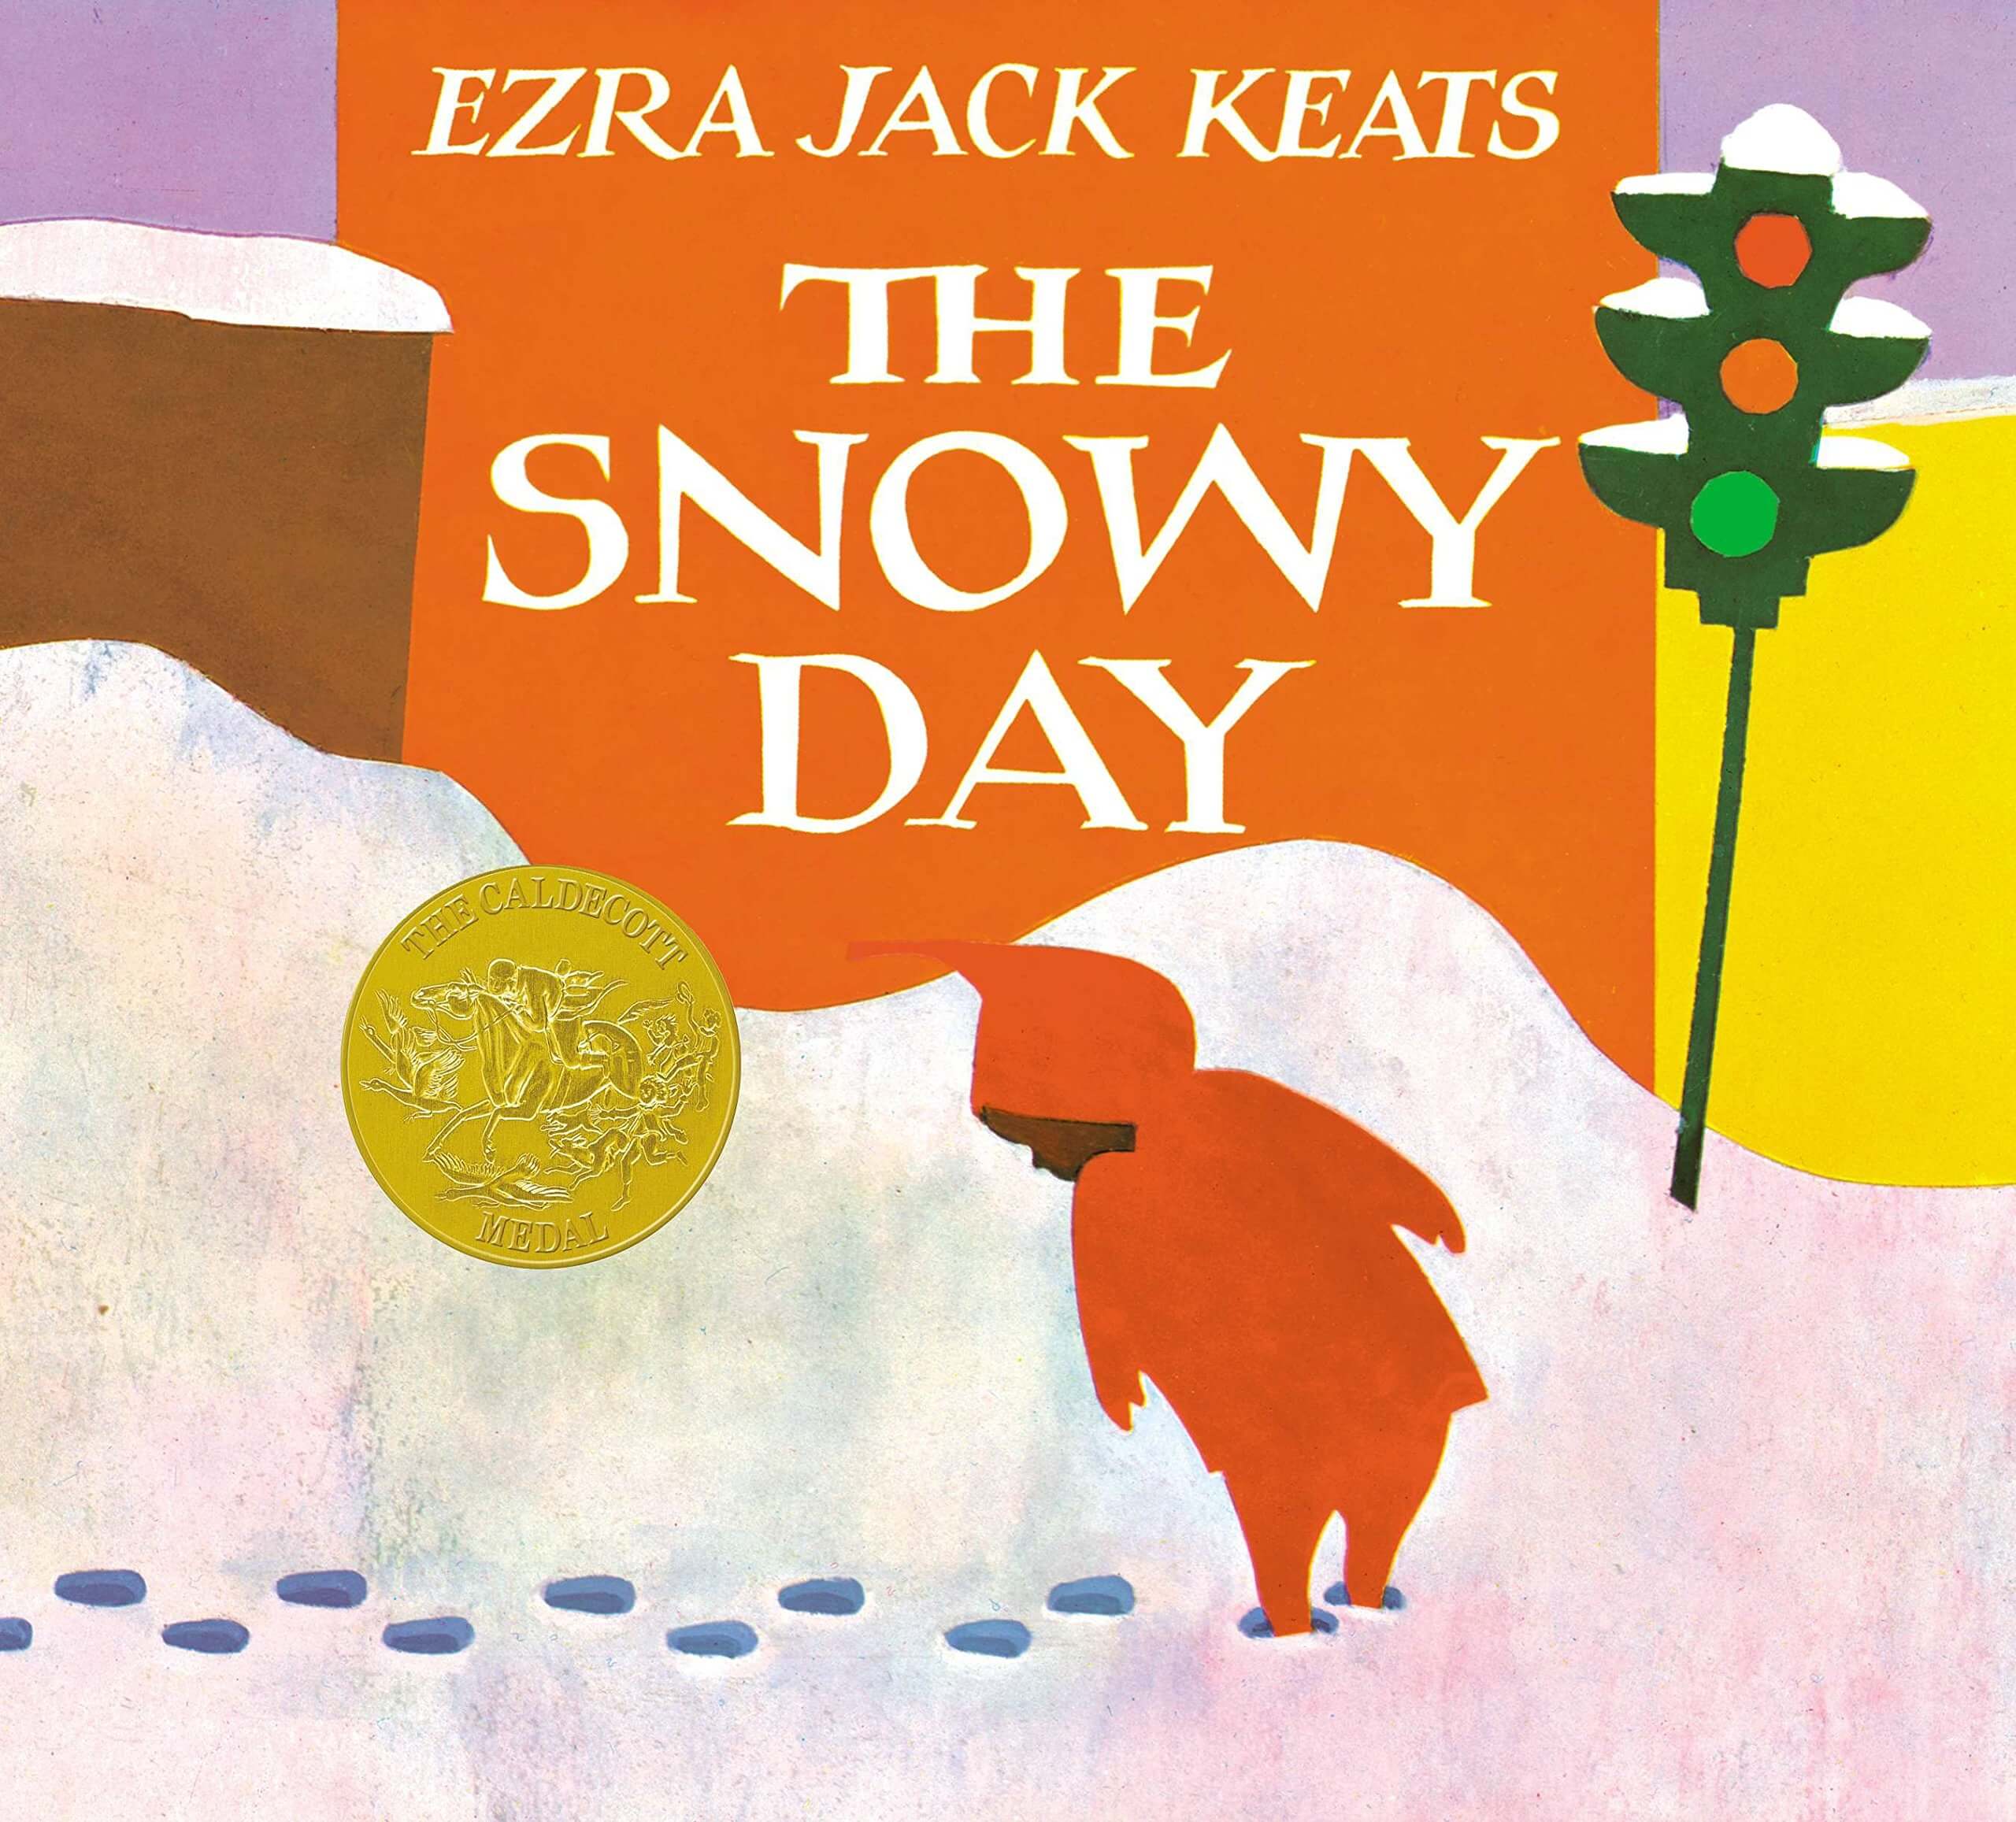  The Snowy Day, by Erza Jack Keats